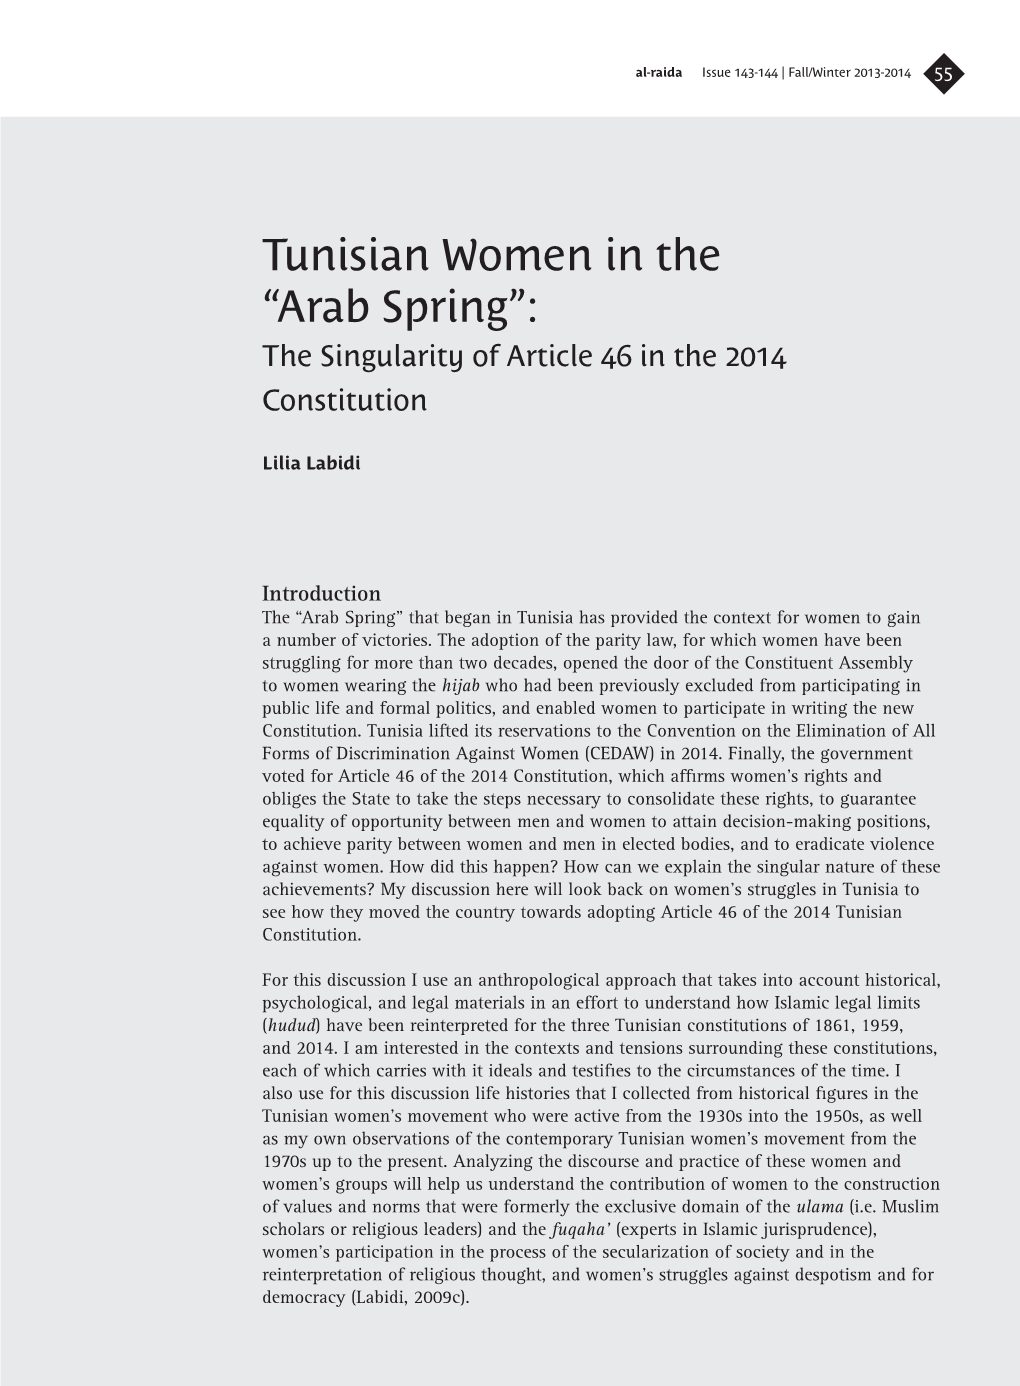 Tunisian Women in the “Arab Spring”: the Singularity of Article 46 in the 2014 Constitution